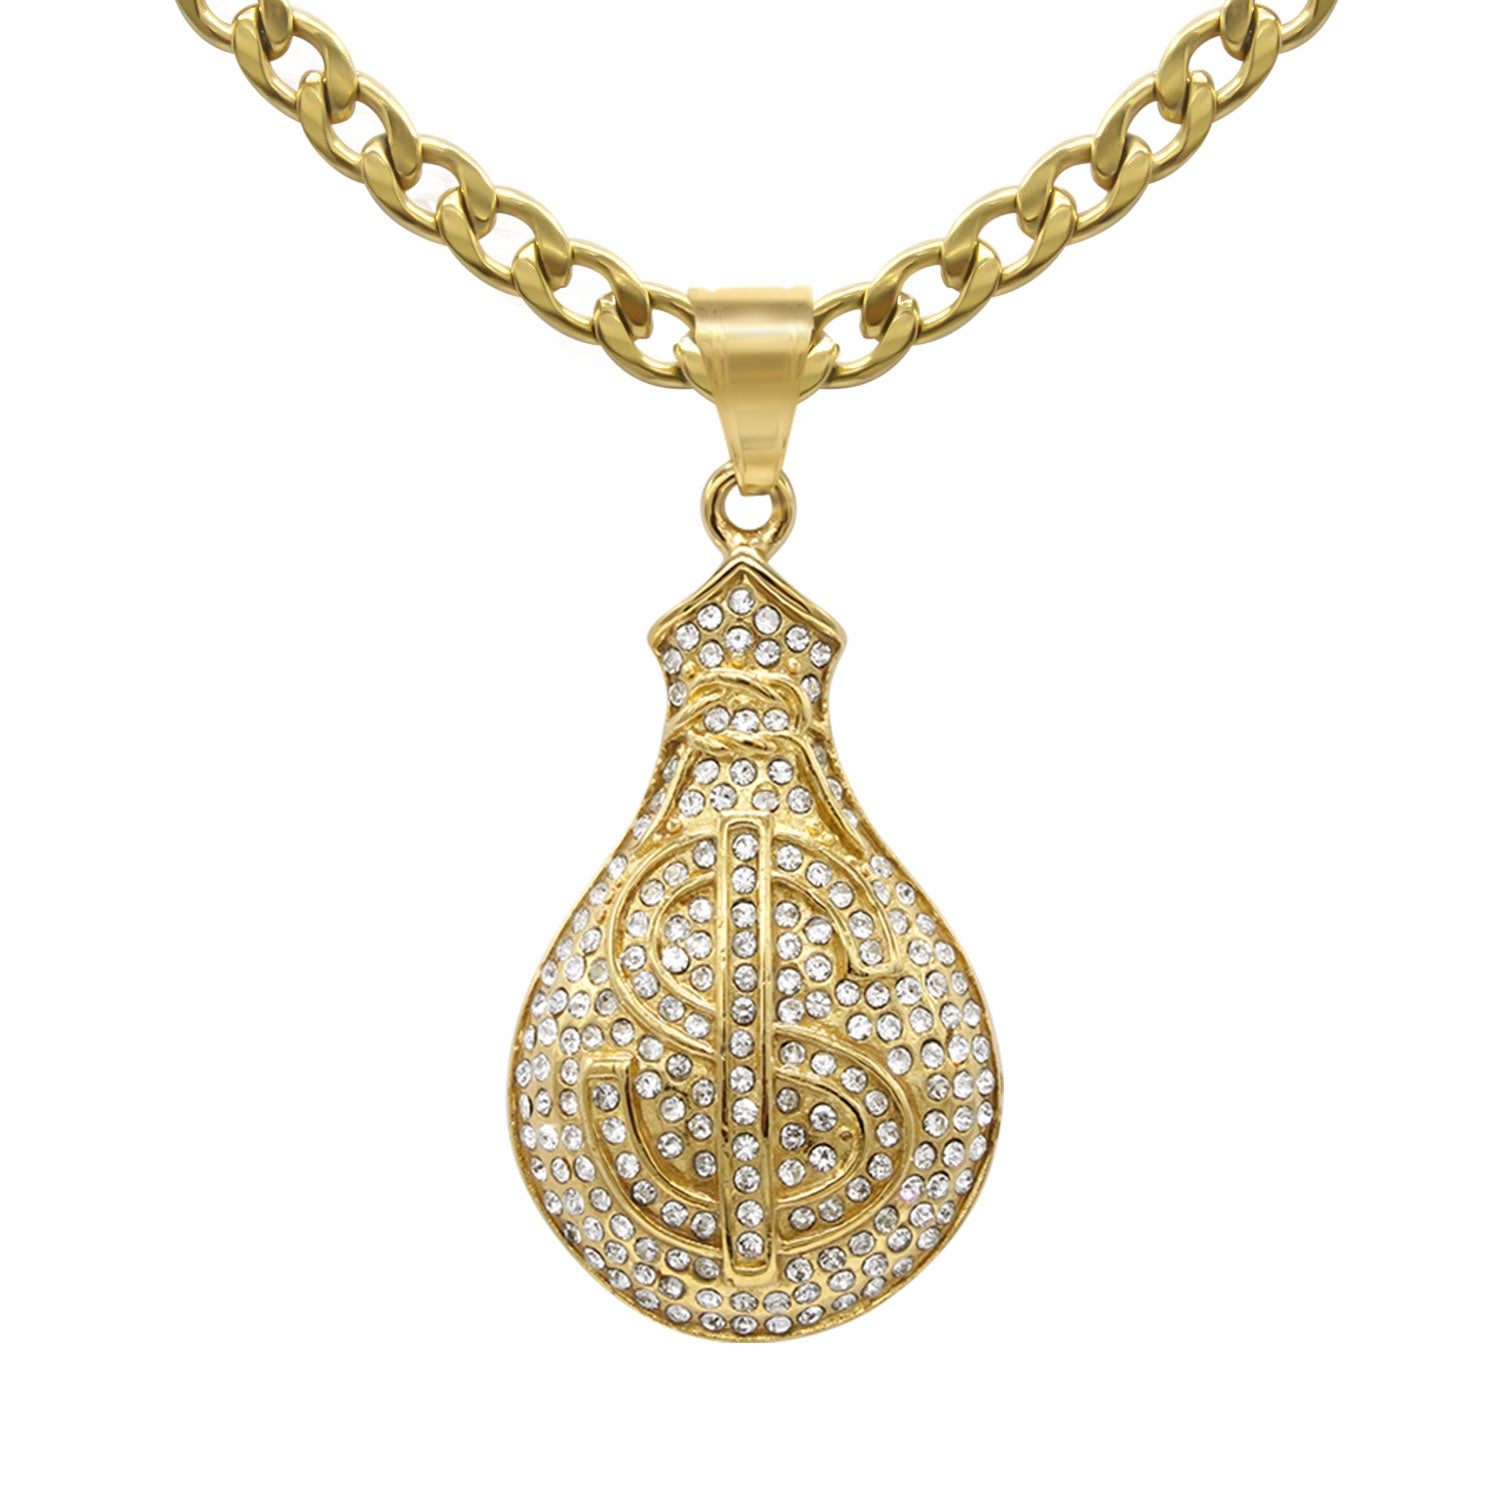 Money Cubic Zirconia Pendant with Necklace Set 14K Gold Plated Stainless Steel